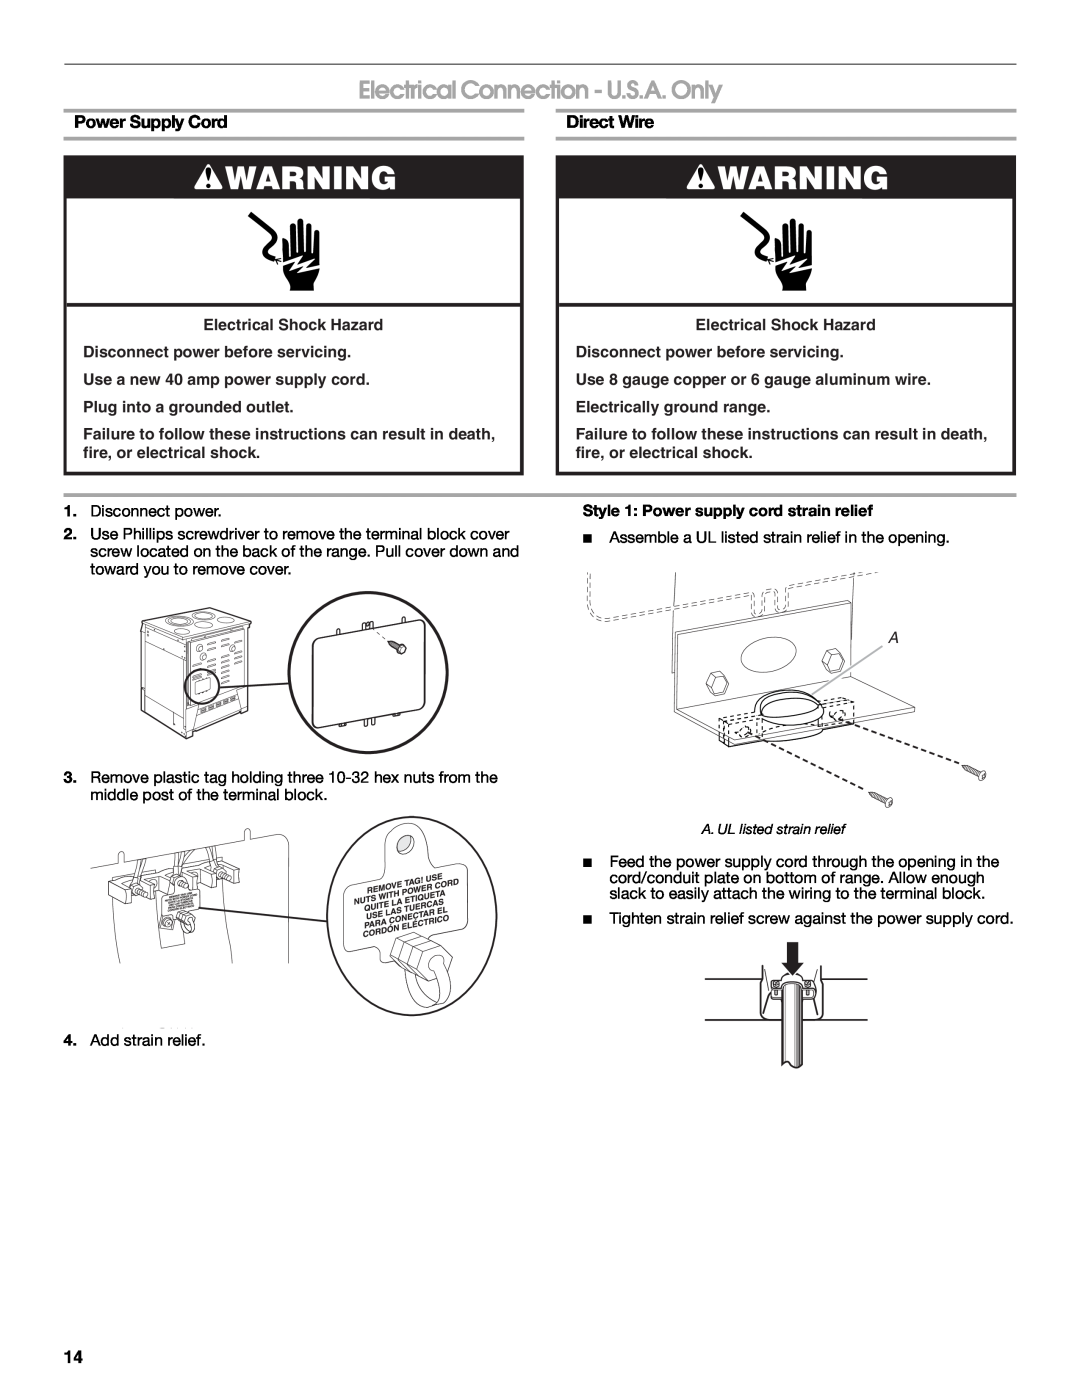 Jenn-Air W10430955A installation instructions Electrical Connection - U.S.A. Only, Power Supply Cord, Direct Wire 